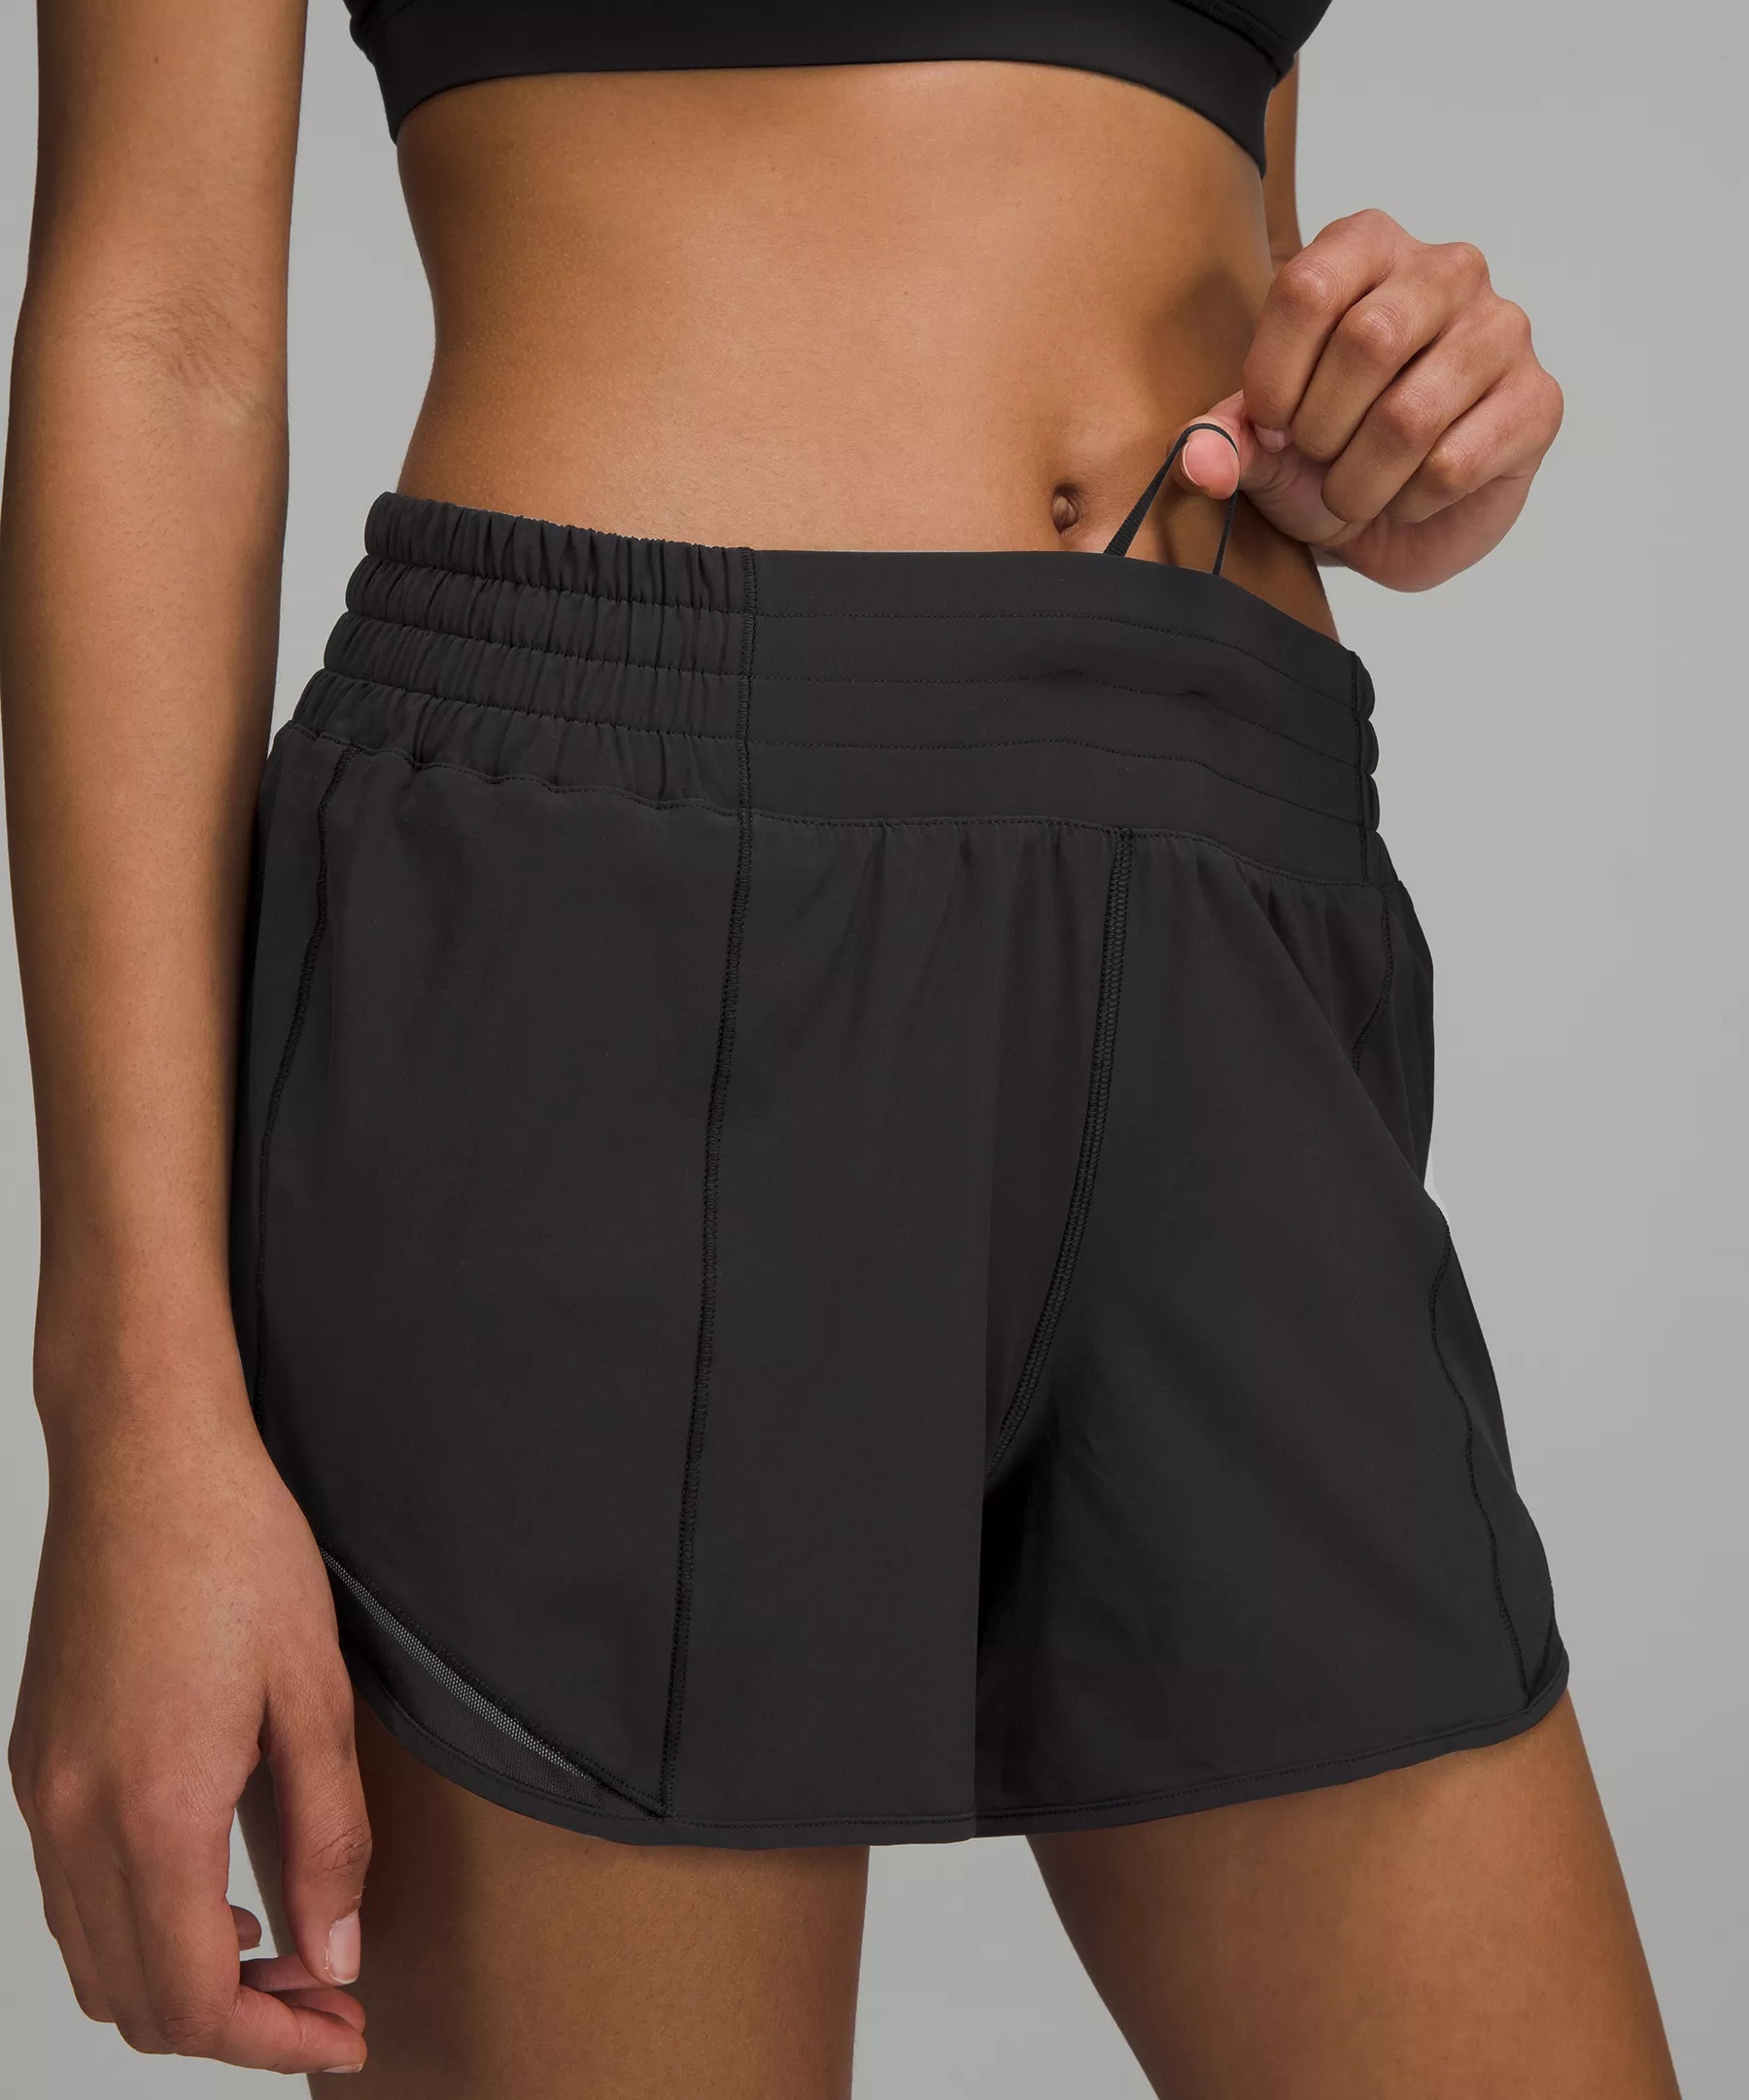 Hotty Hot High-Rise Lined Short 4" - 4